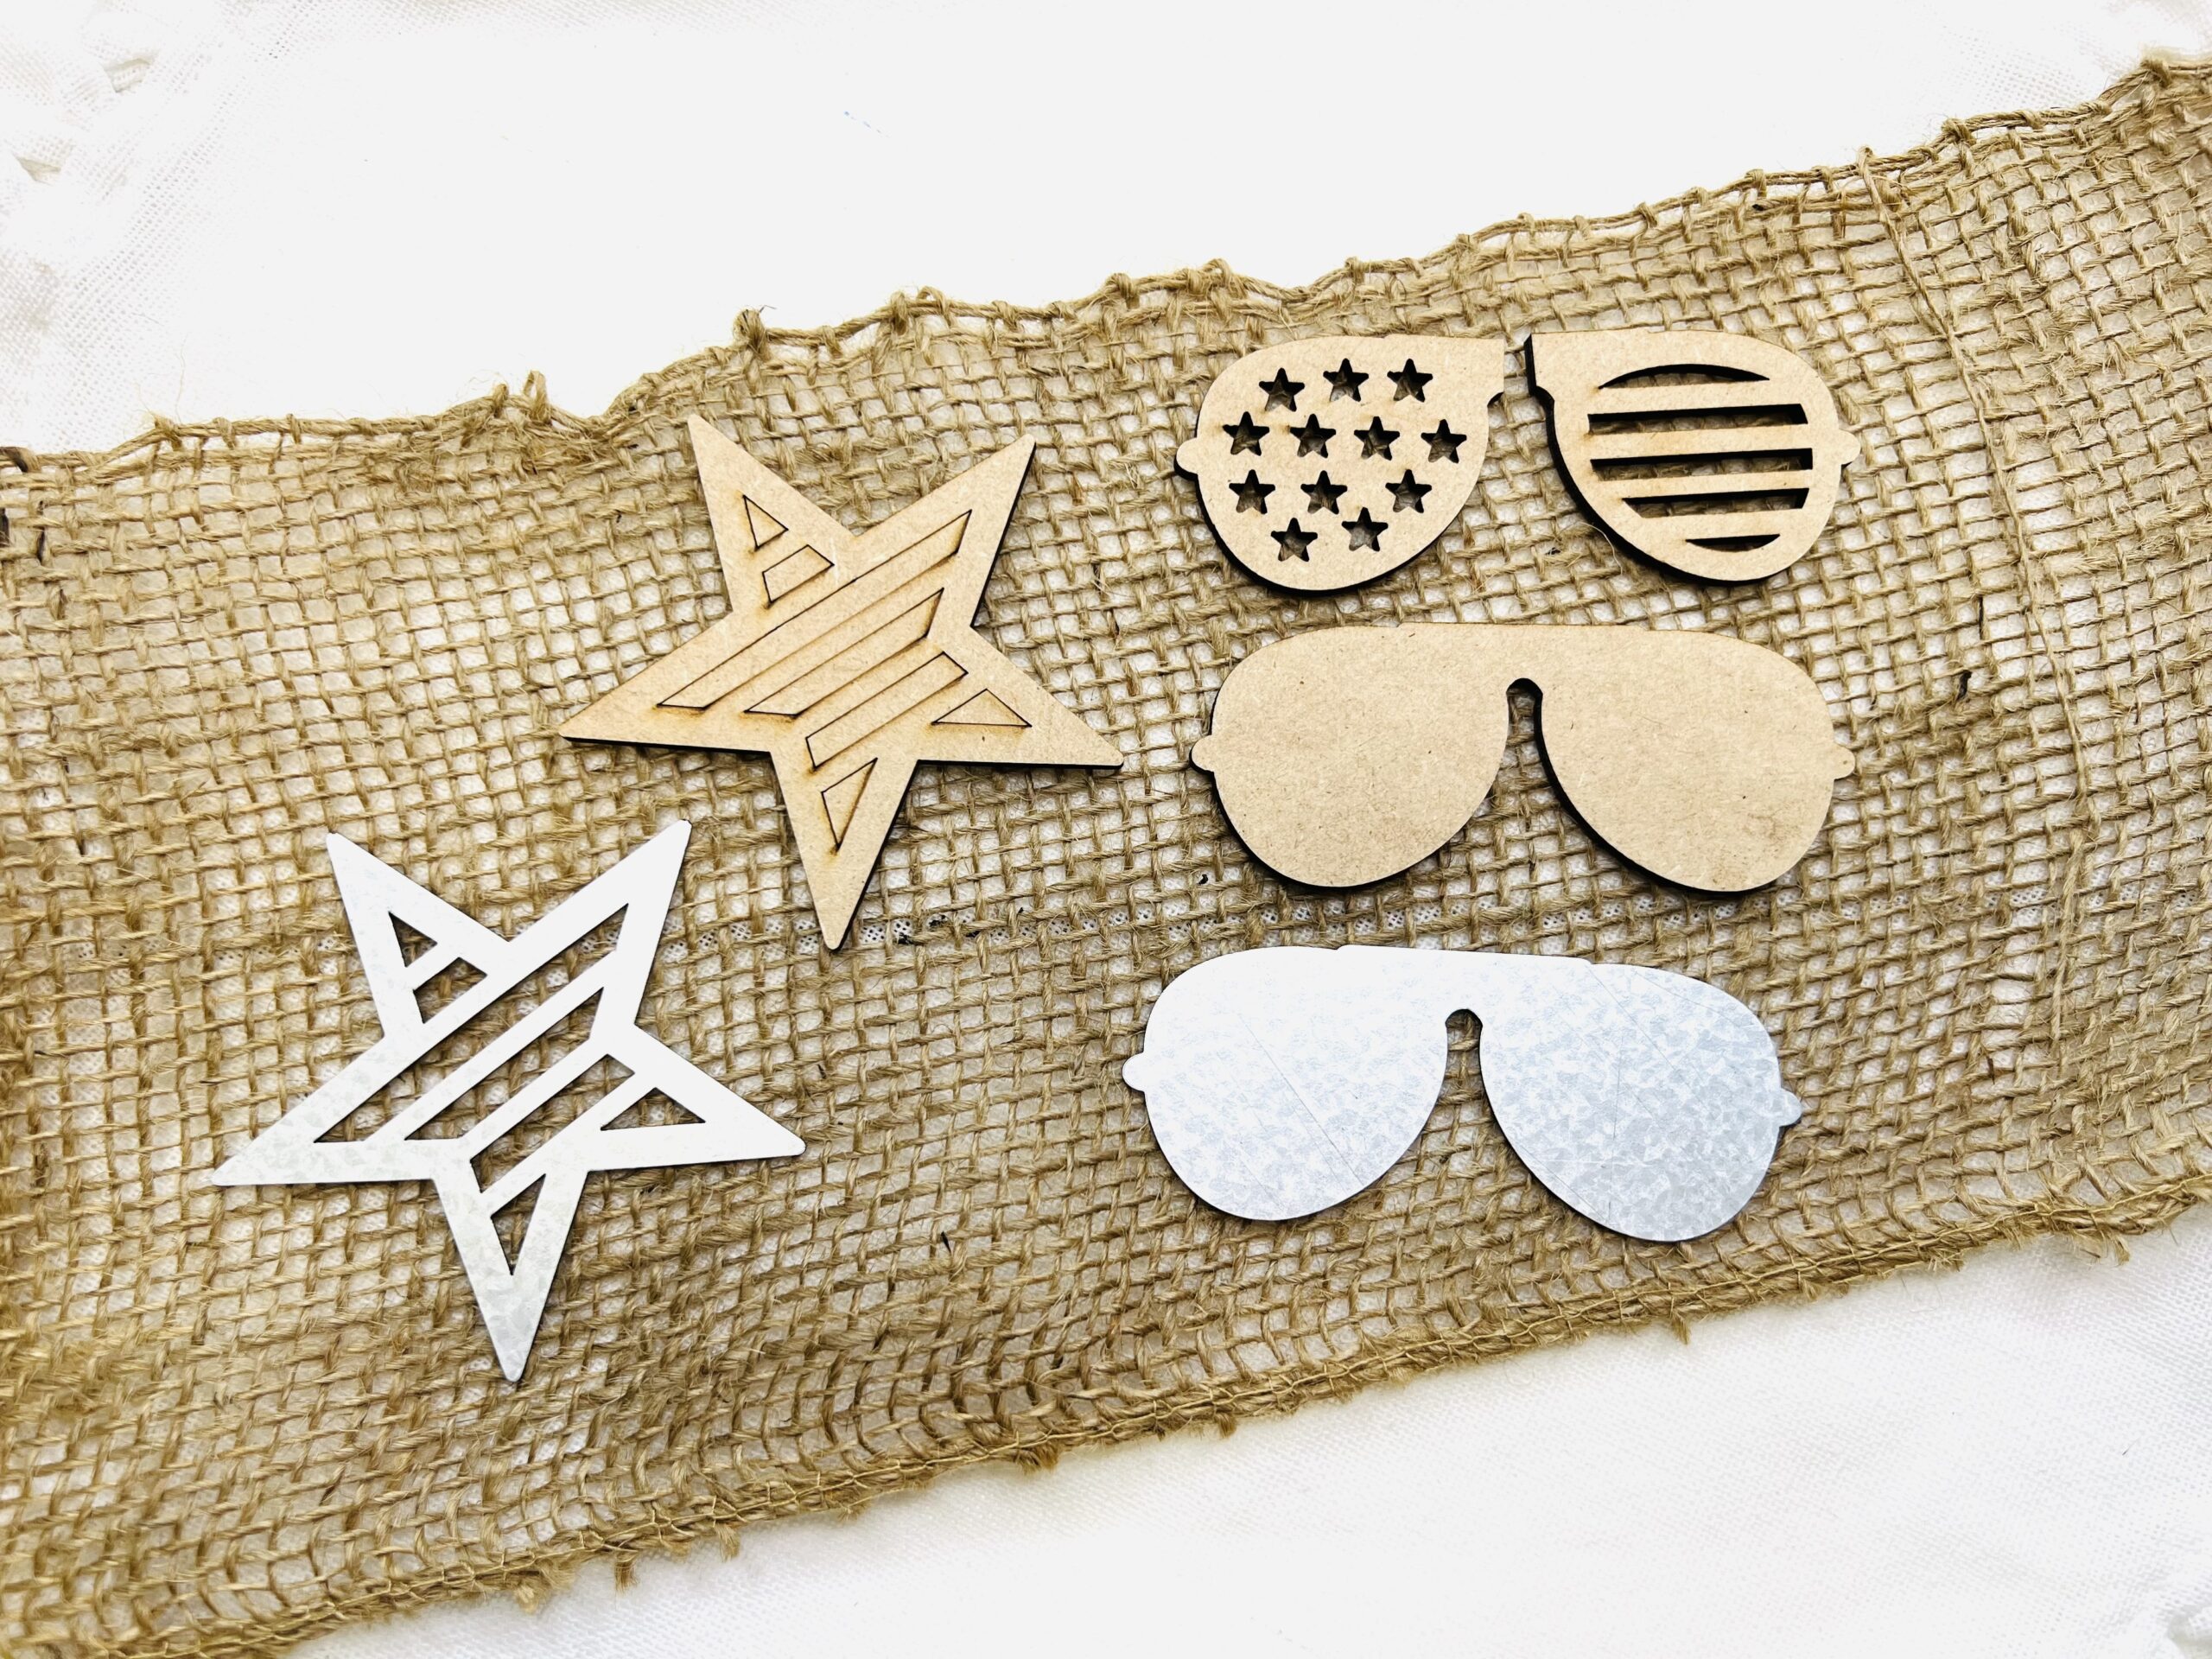 sunglasses ans star shape wood and metal cutout for diy crafting